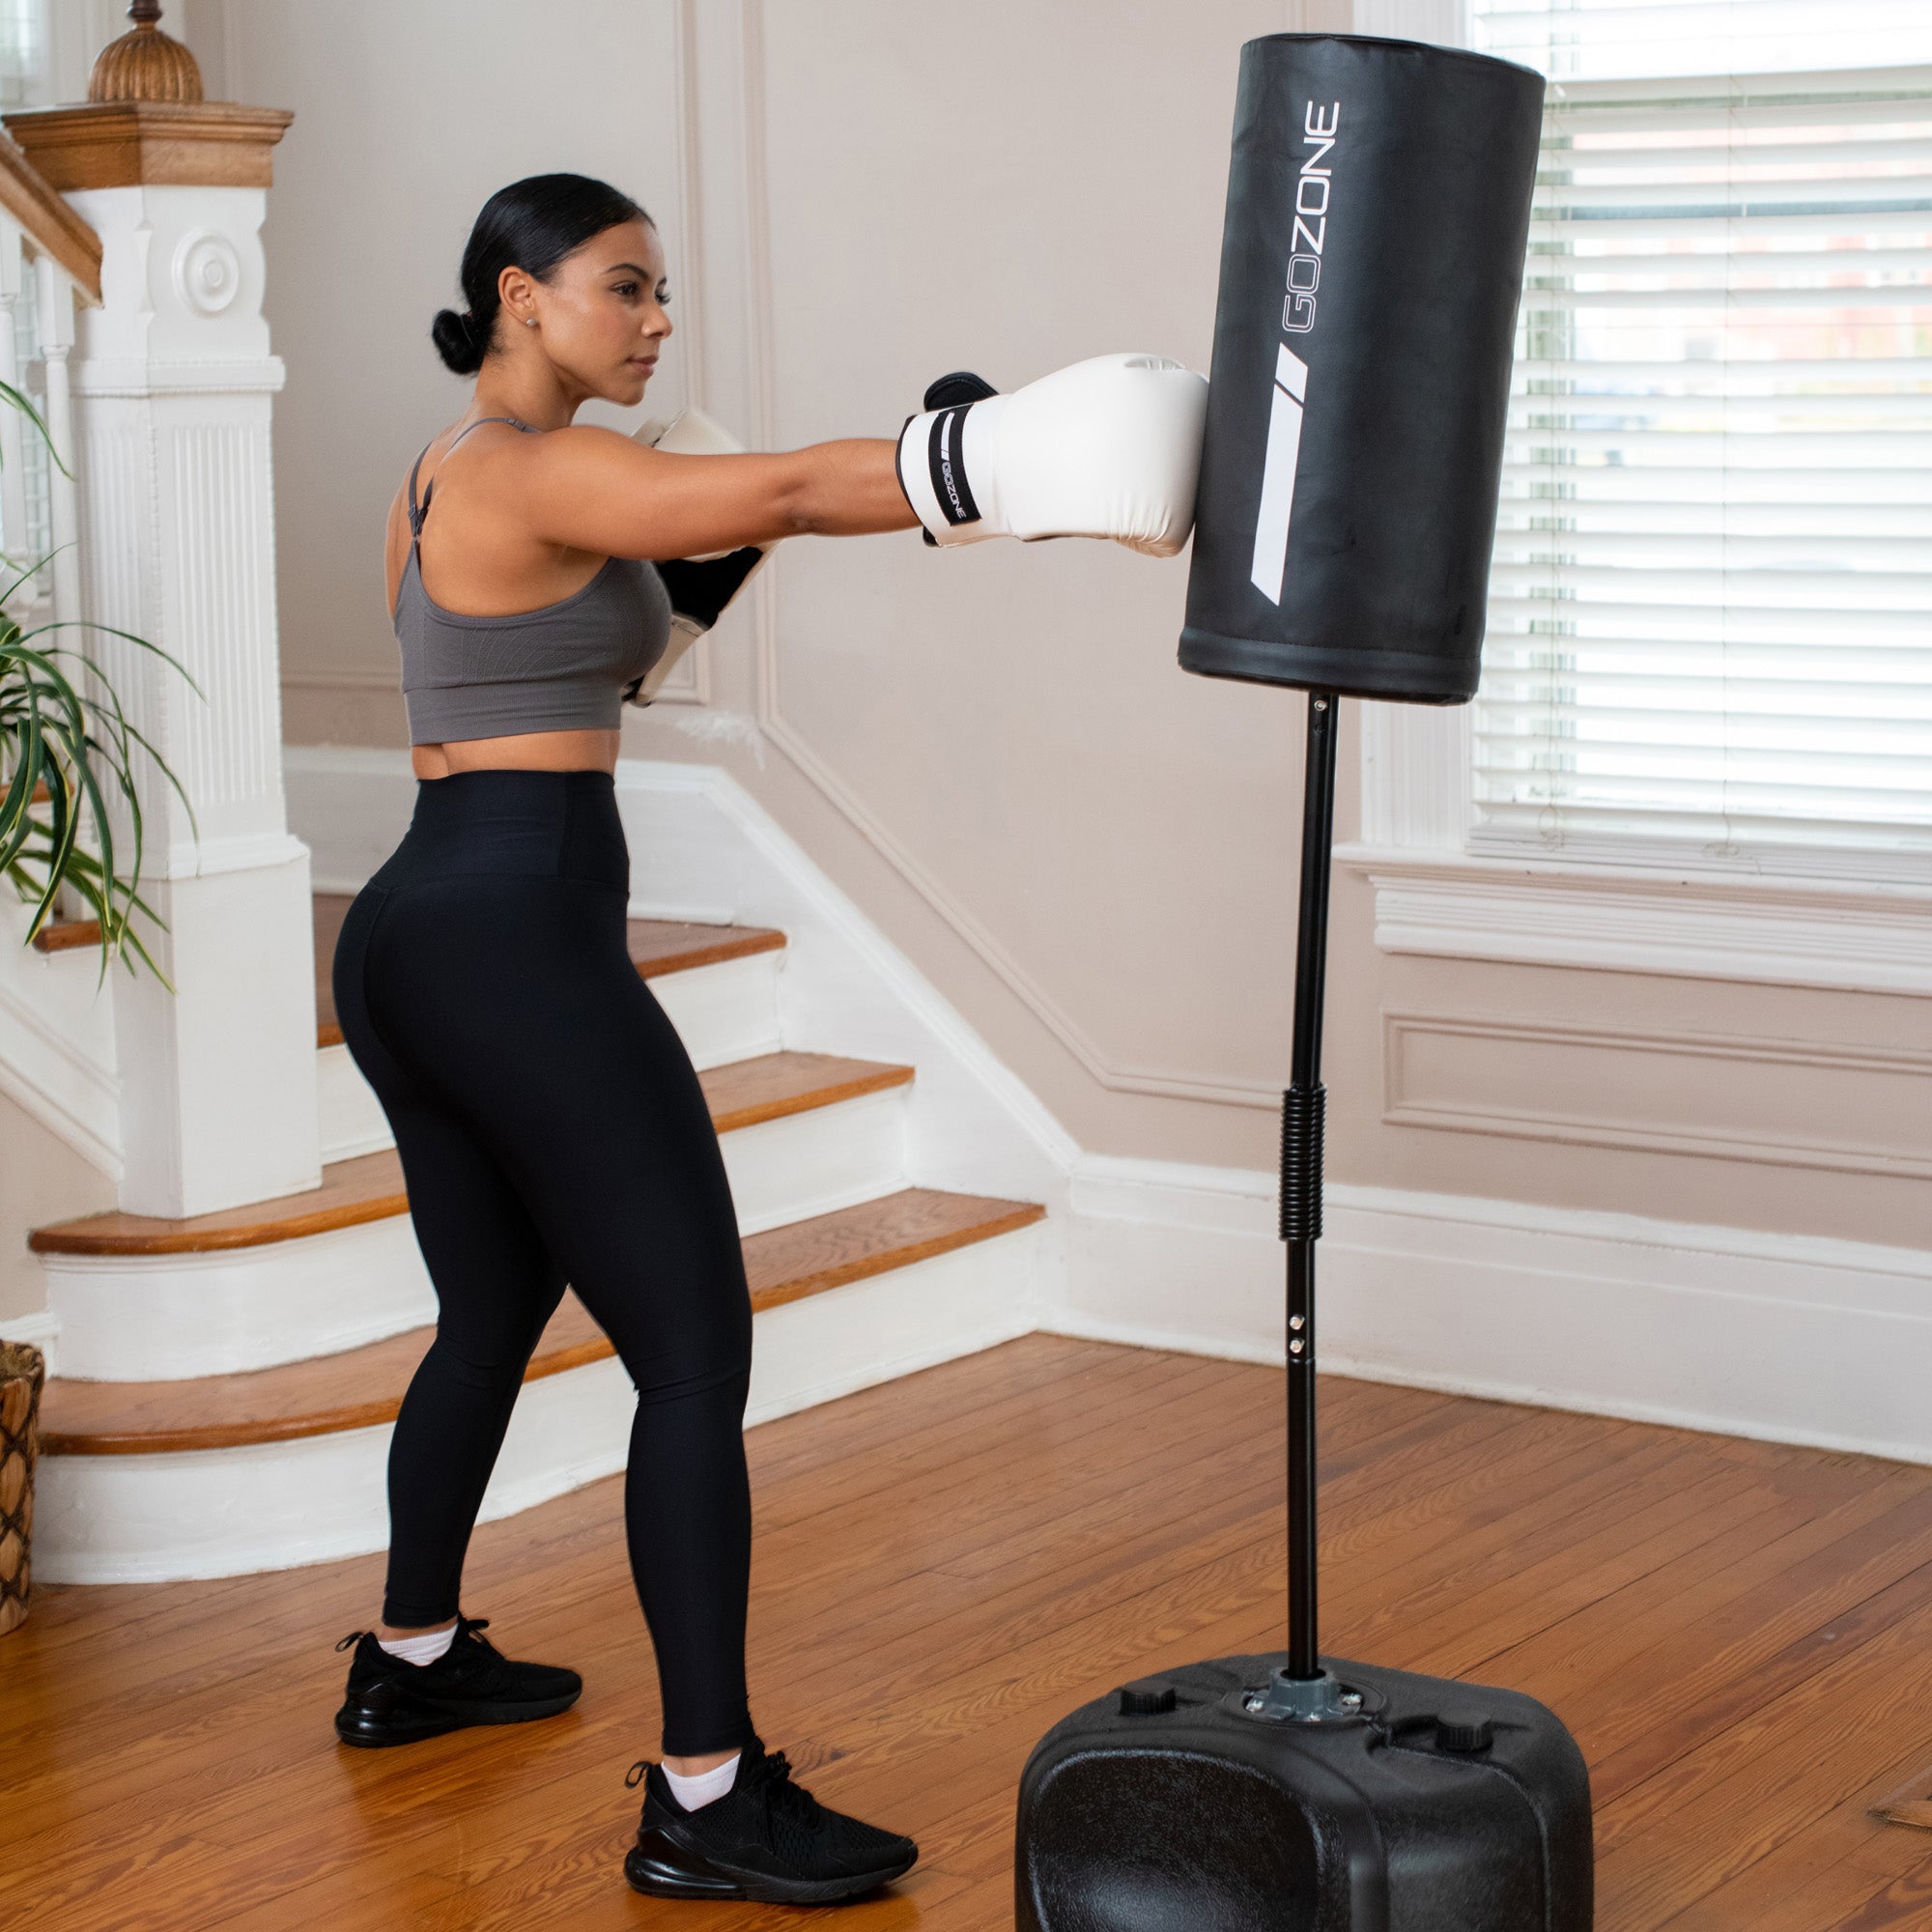 30 Minute Boxing HIIT Workout – Hungry4Fitness